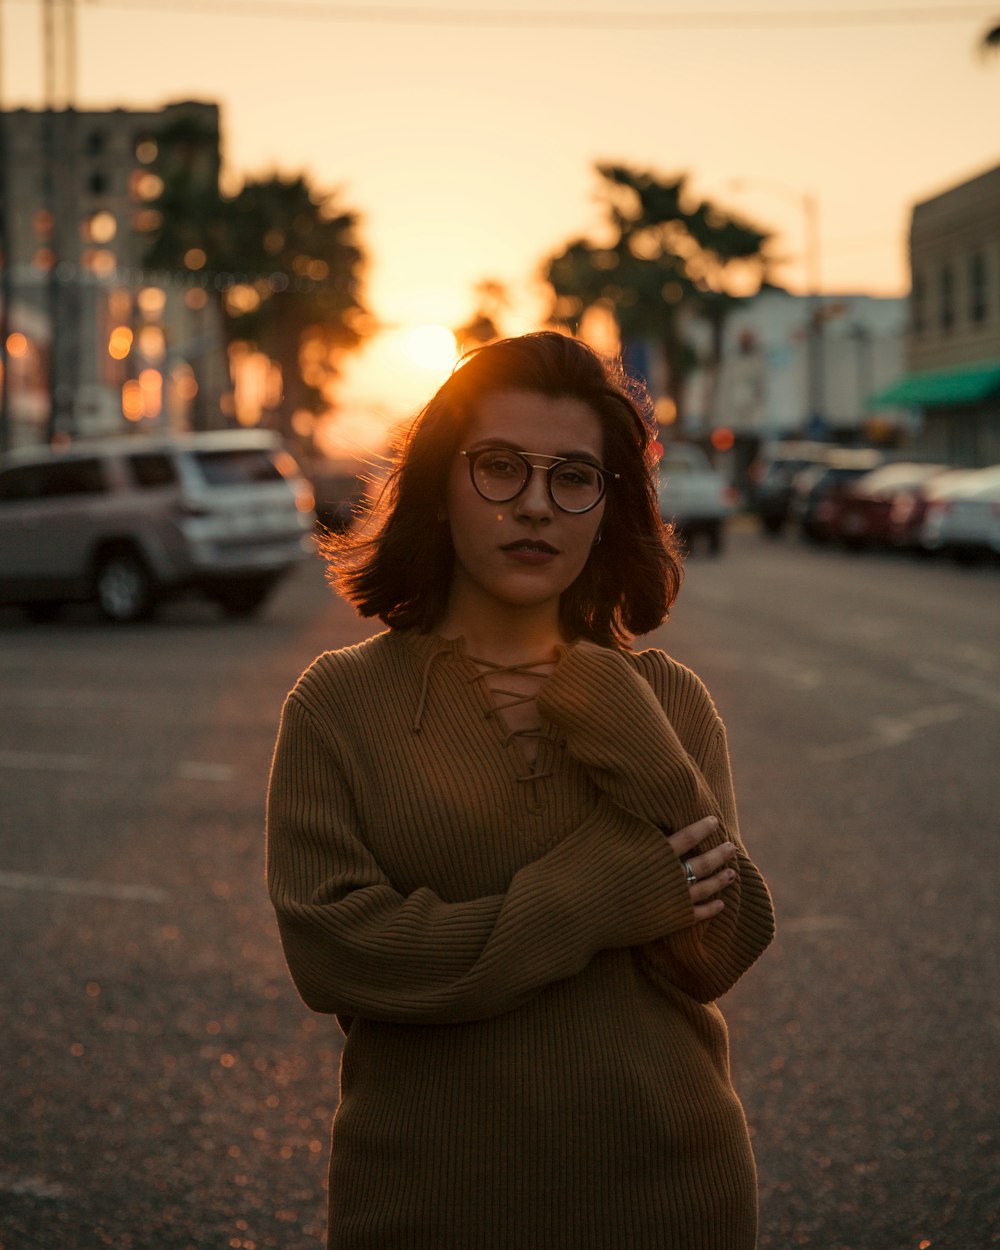 woman standing on road near vehicles during golden hour